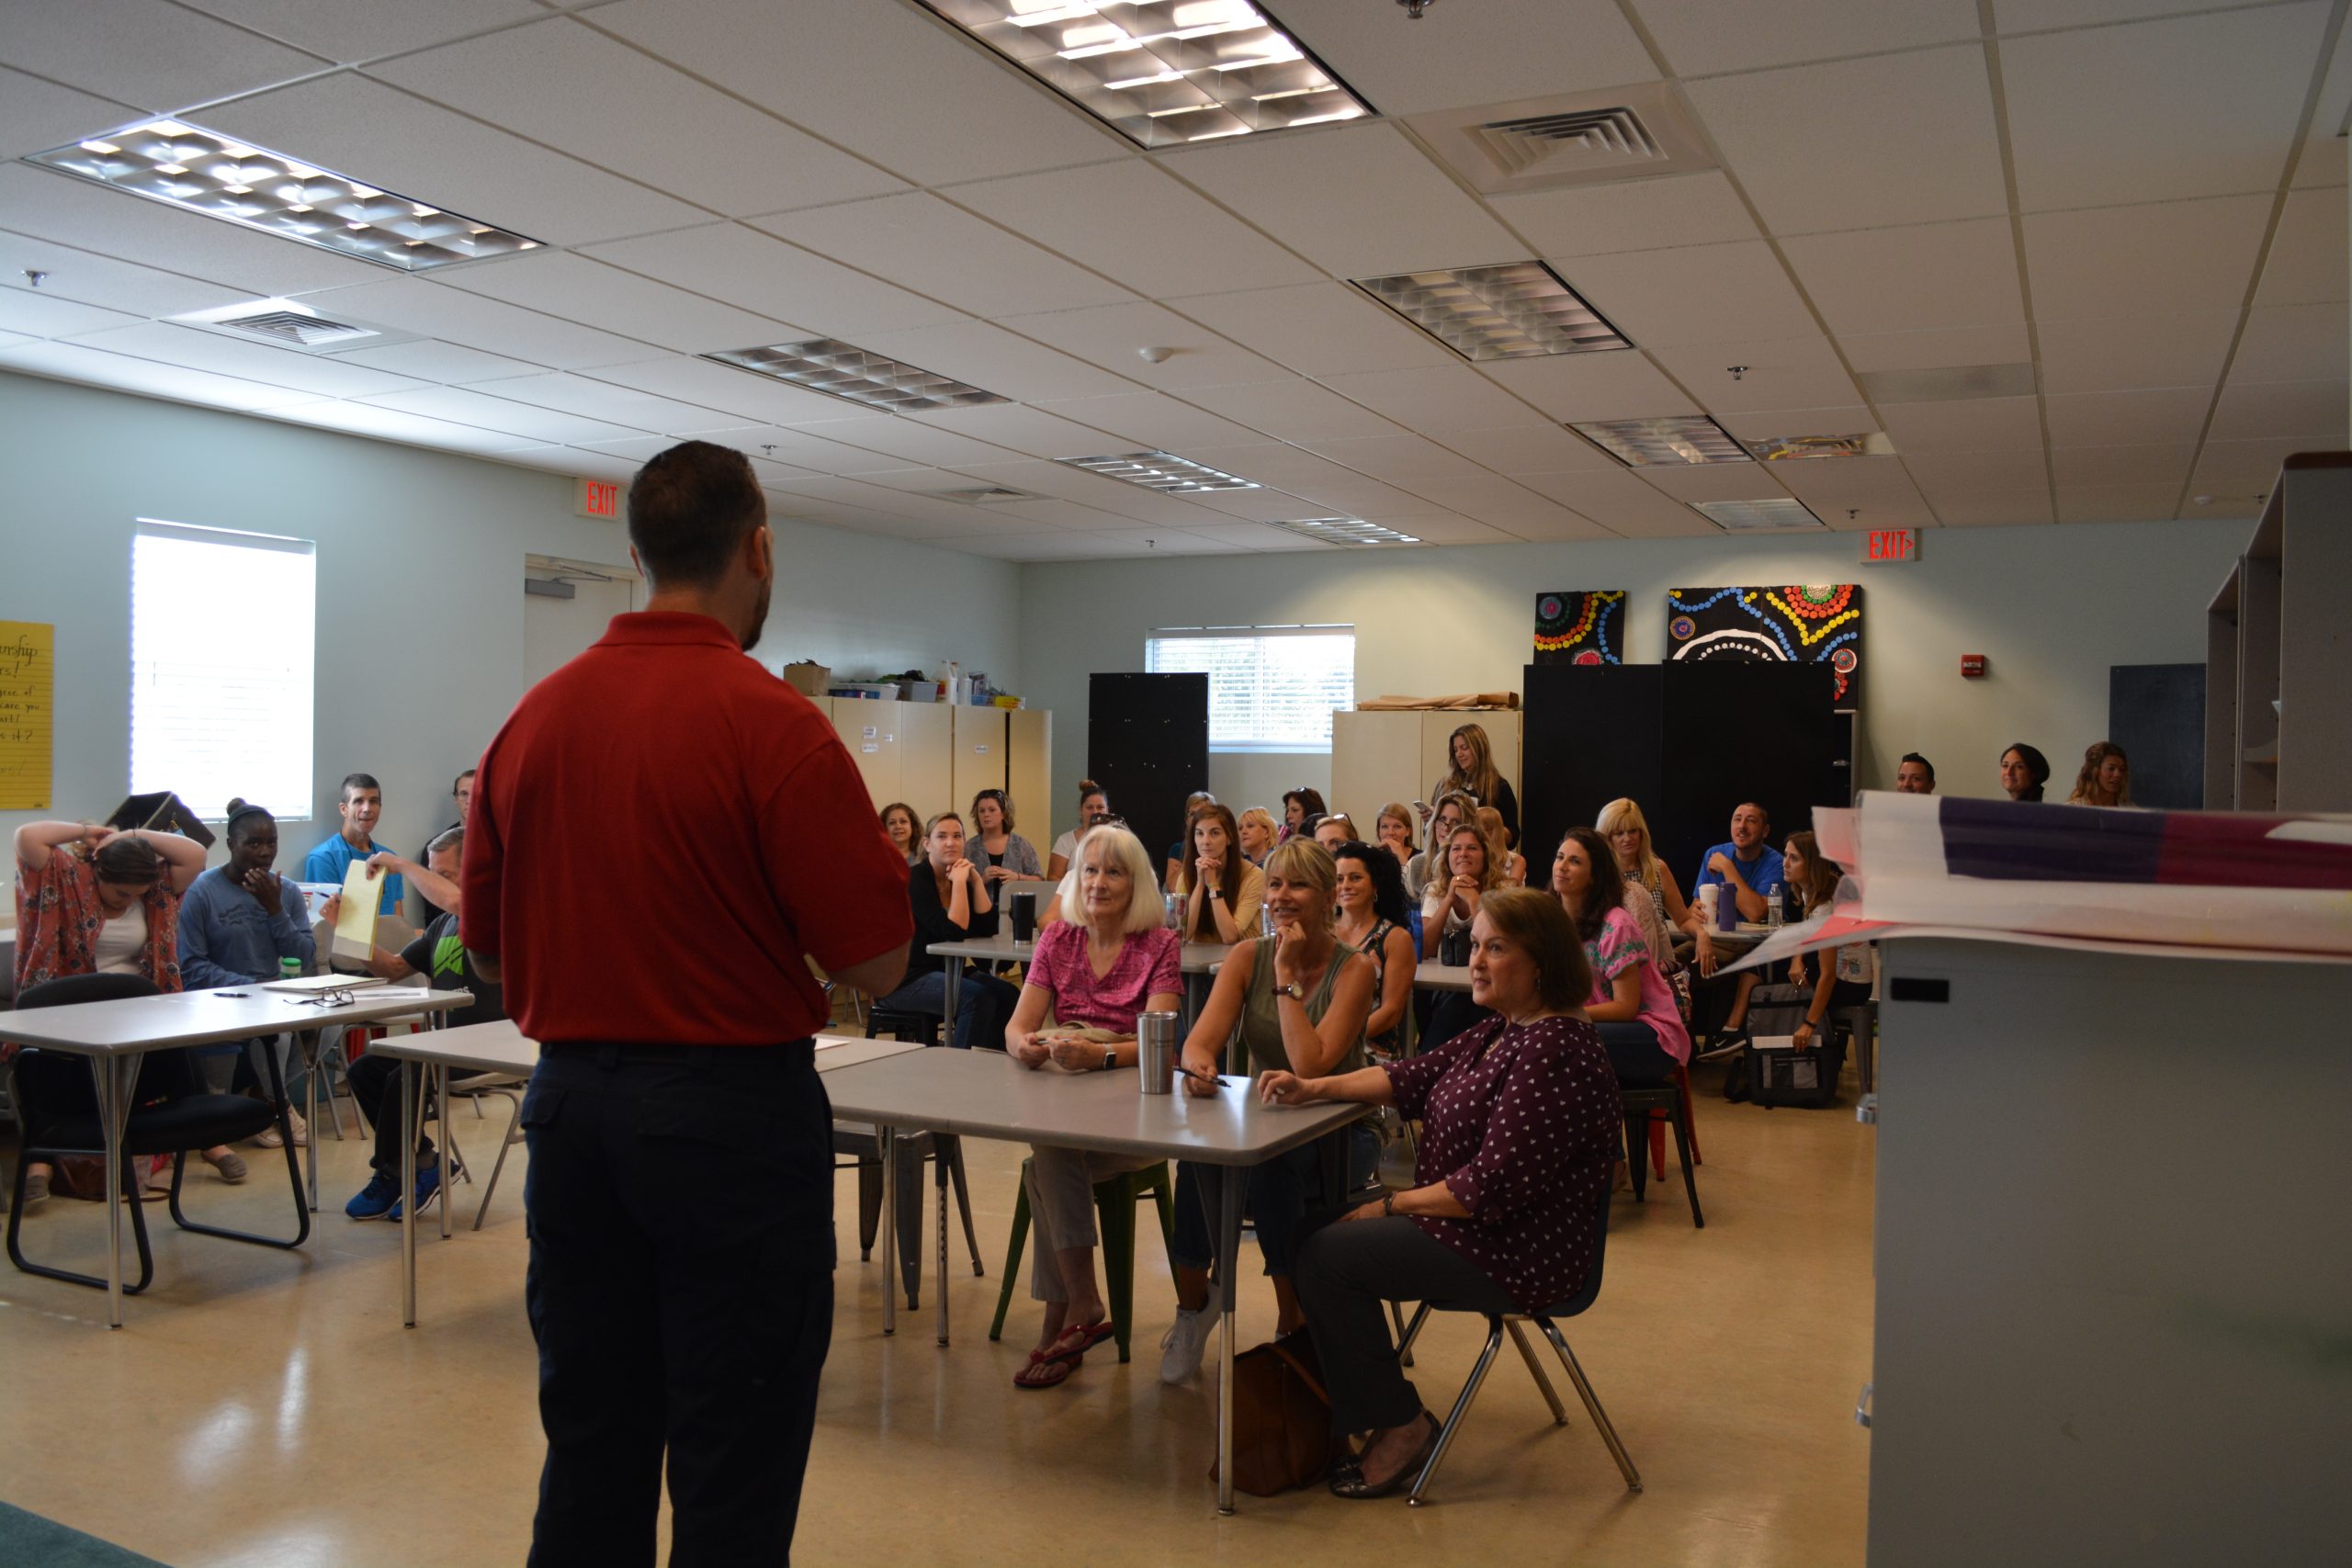 guardian defense trainer at a local school for back to school preparation tips regarding a local active shooter incident